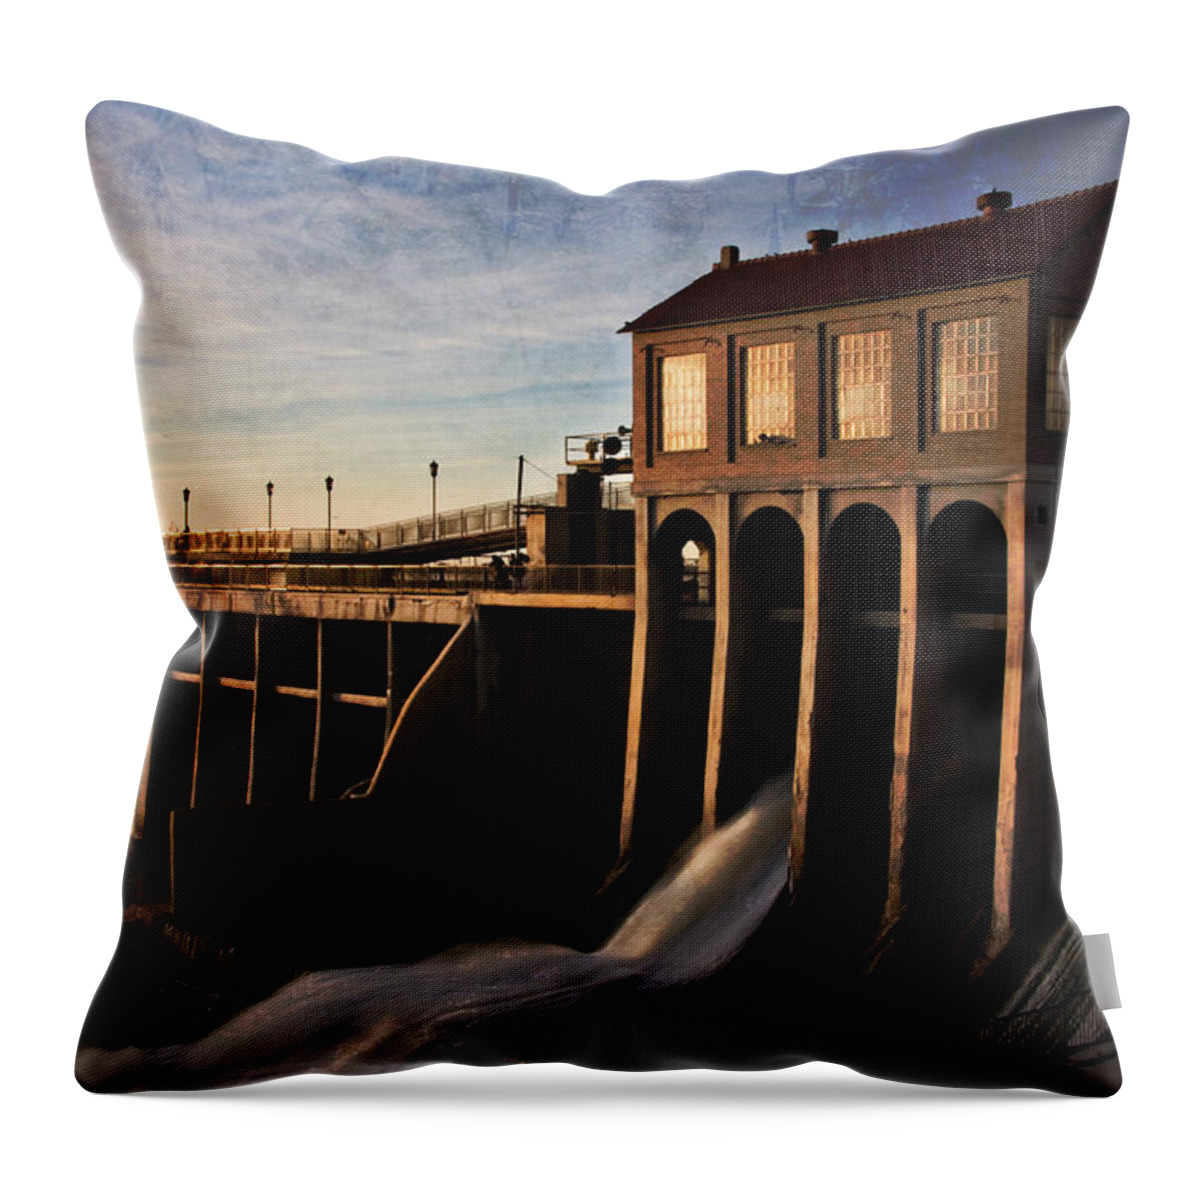 Oklahoma Throw Pillow featuring the photograph Overholser Dam by Lana Trussell